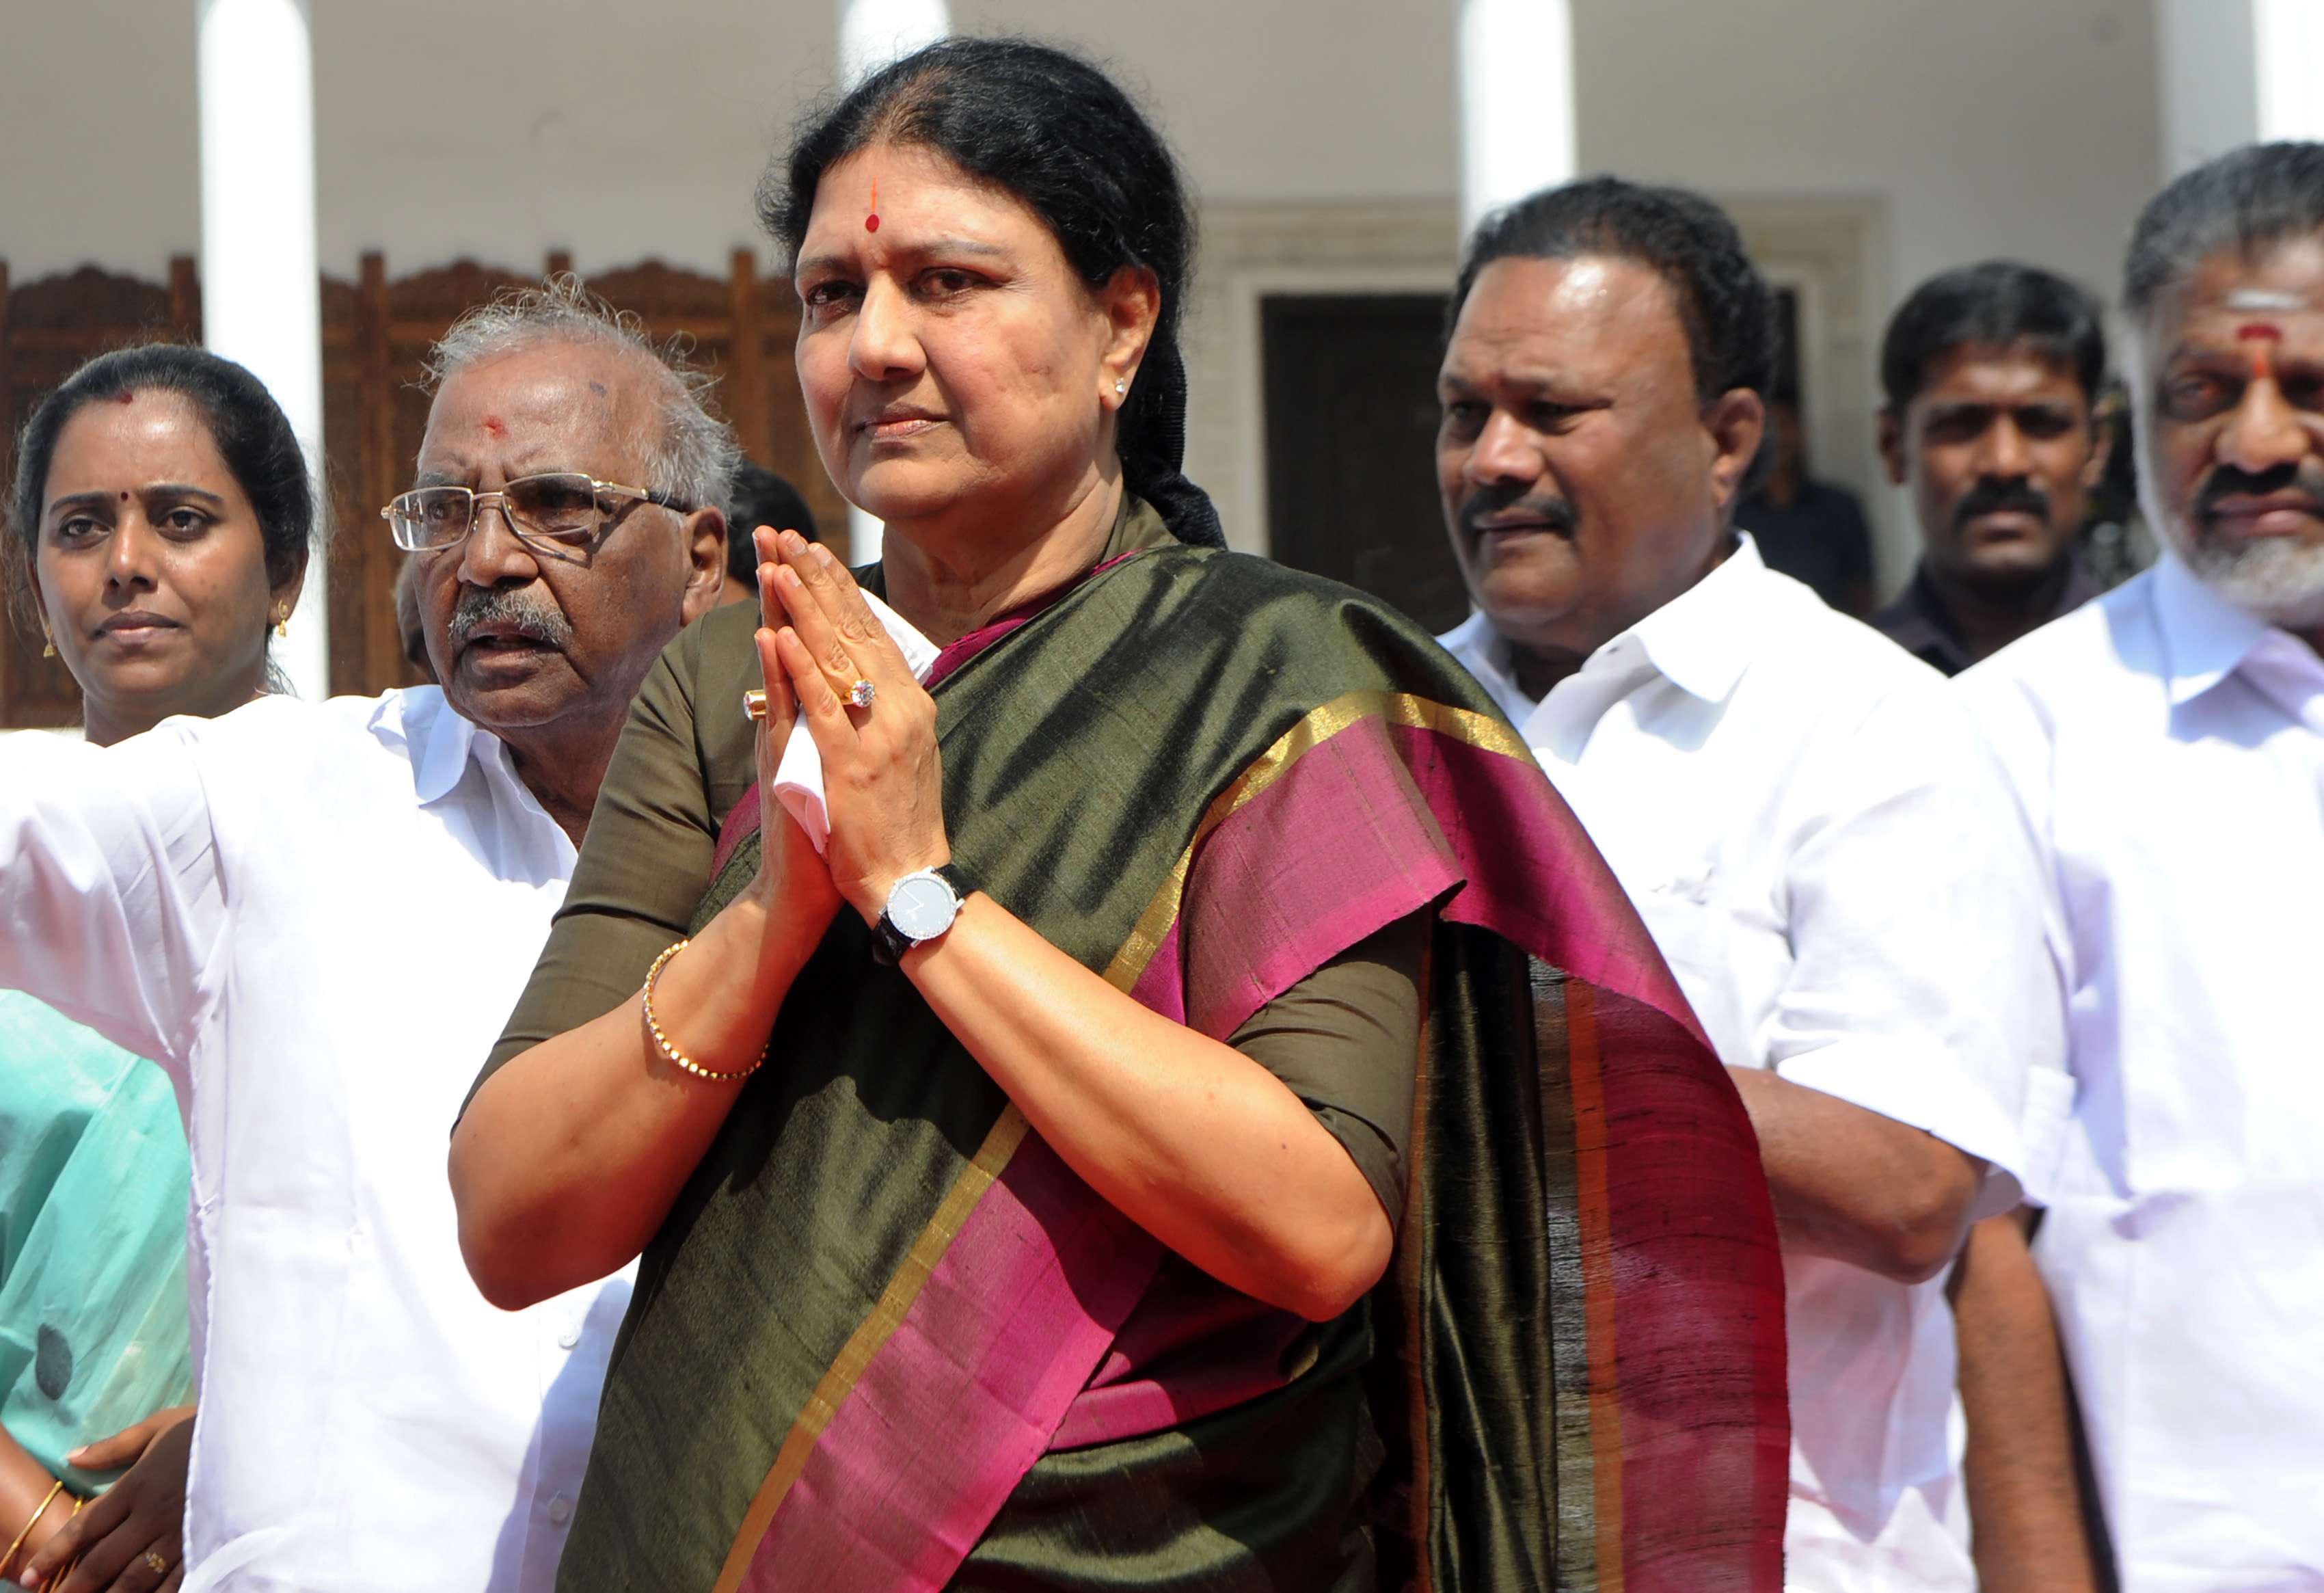 V.K. Sasikala, the long-time friend of former Tamil Nadu chief minister, who died in December, faces pushback in her attempts to fill her role